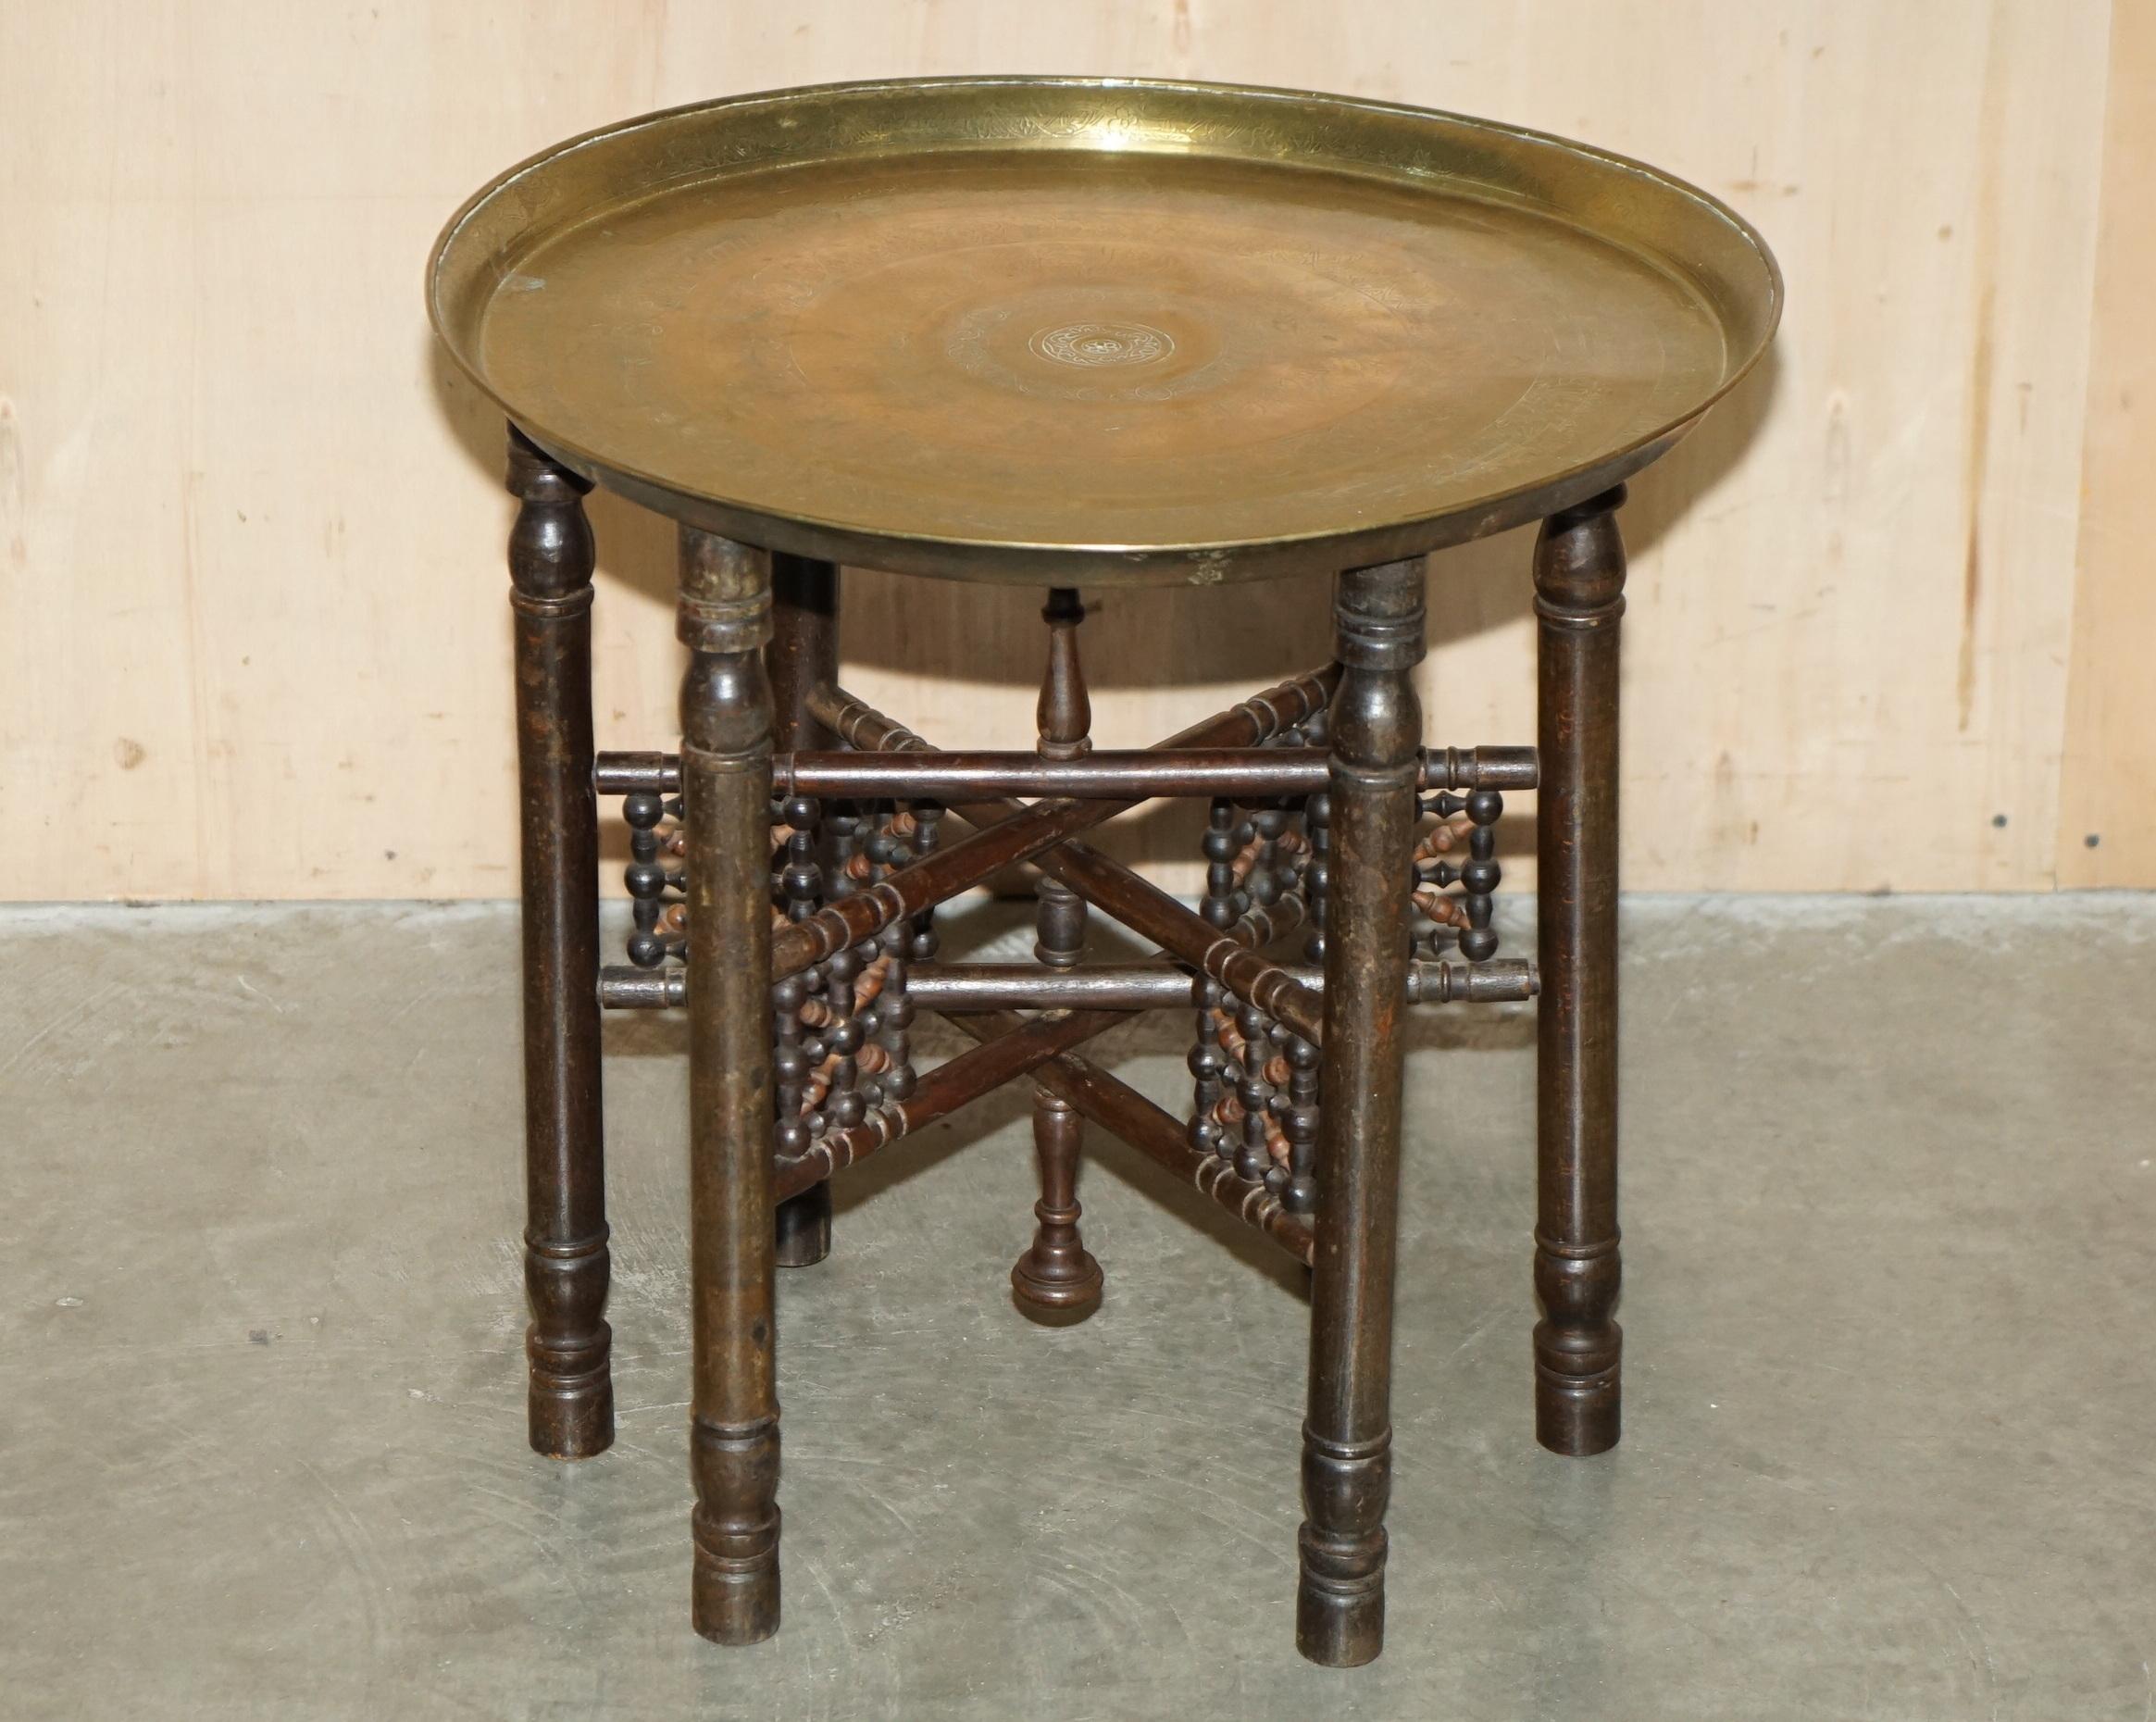 Royal House Antiques

Royal House Antiques is delighted to offer for sale this ornately hand carved Moroccan brass tray table retailed through Liberty's in the 1880-1900's

Please note the delivery fee listed is just a guide, it covers within the